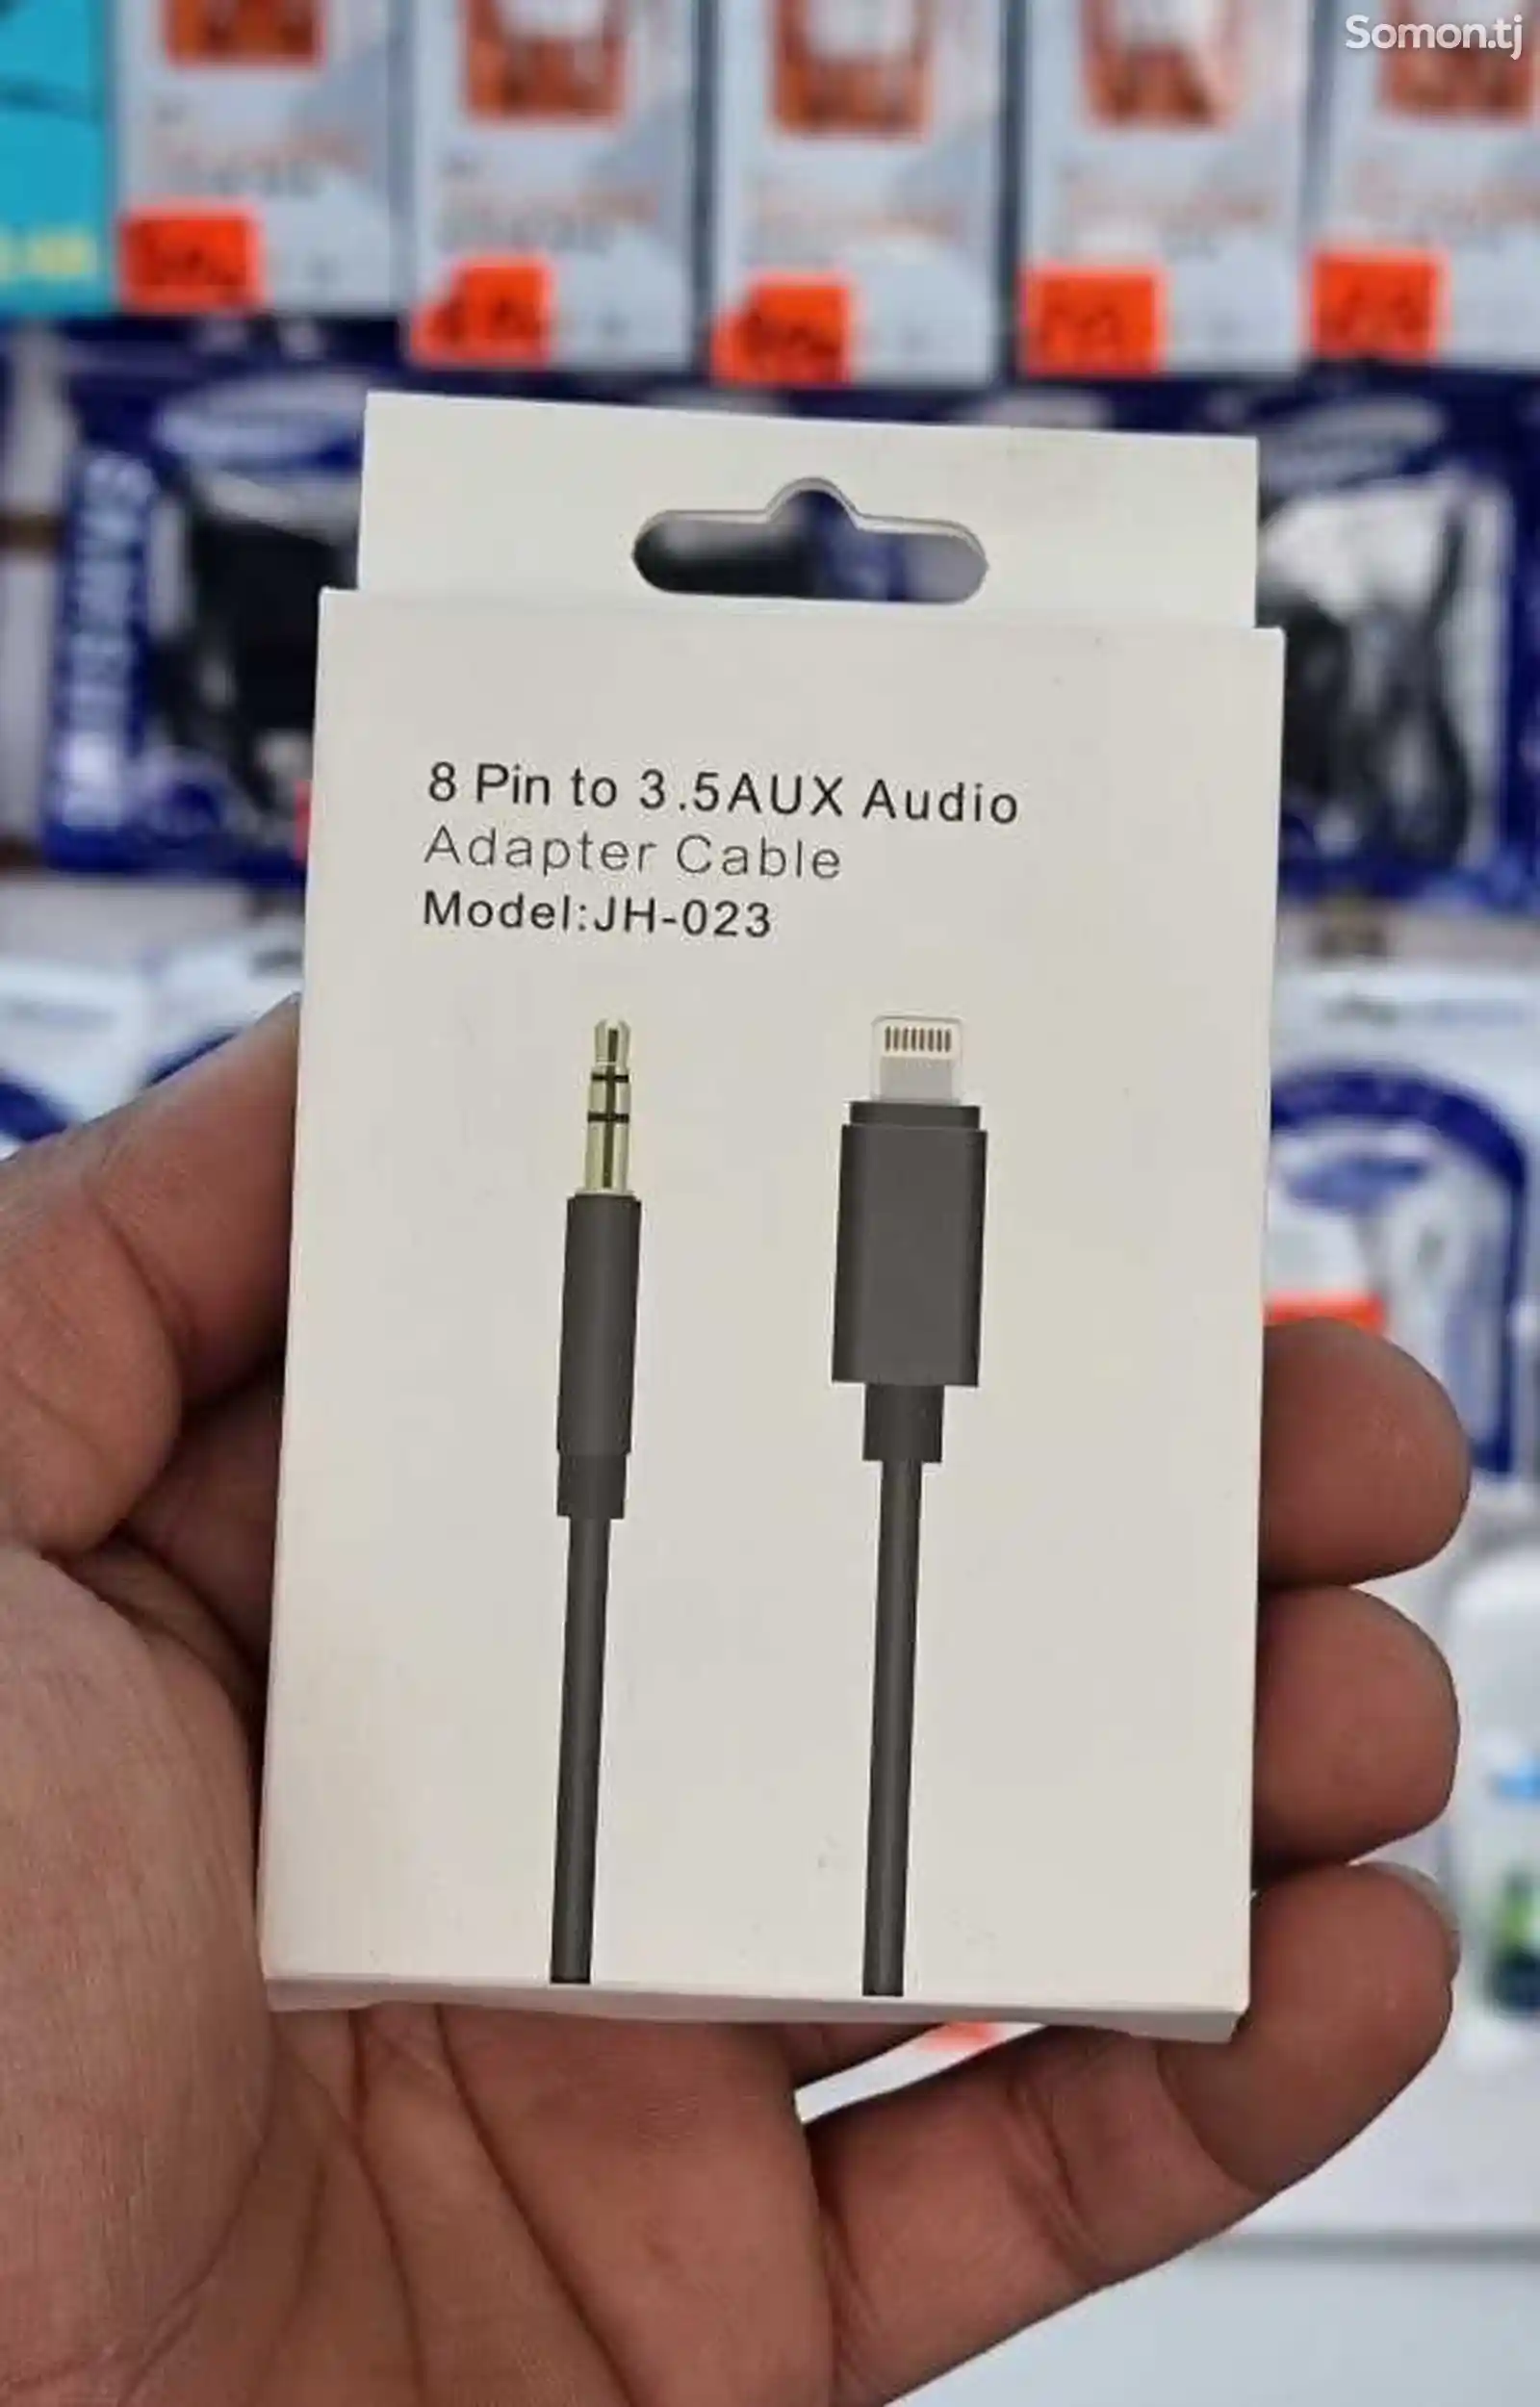 Adapter Cable 3.5 AUX Audio